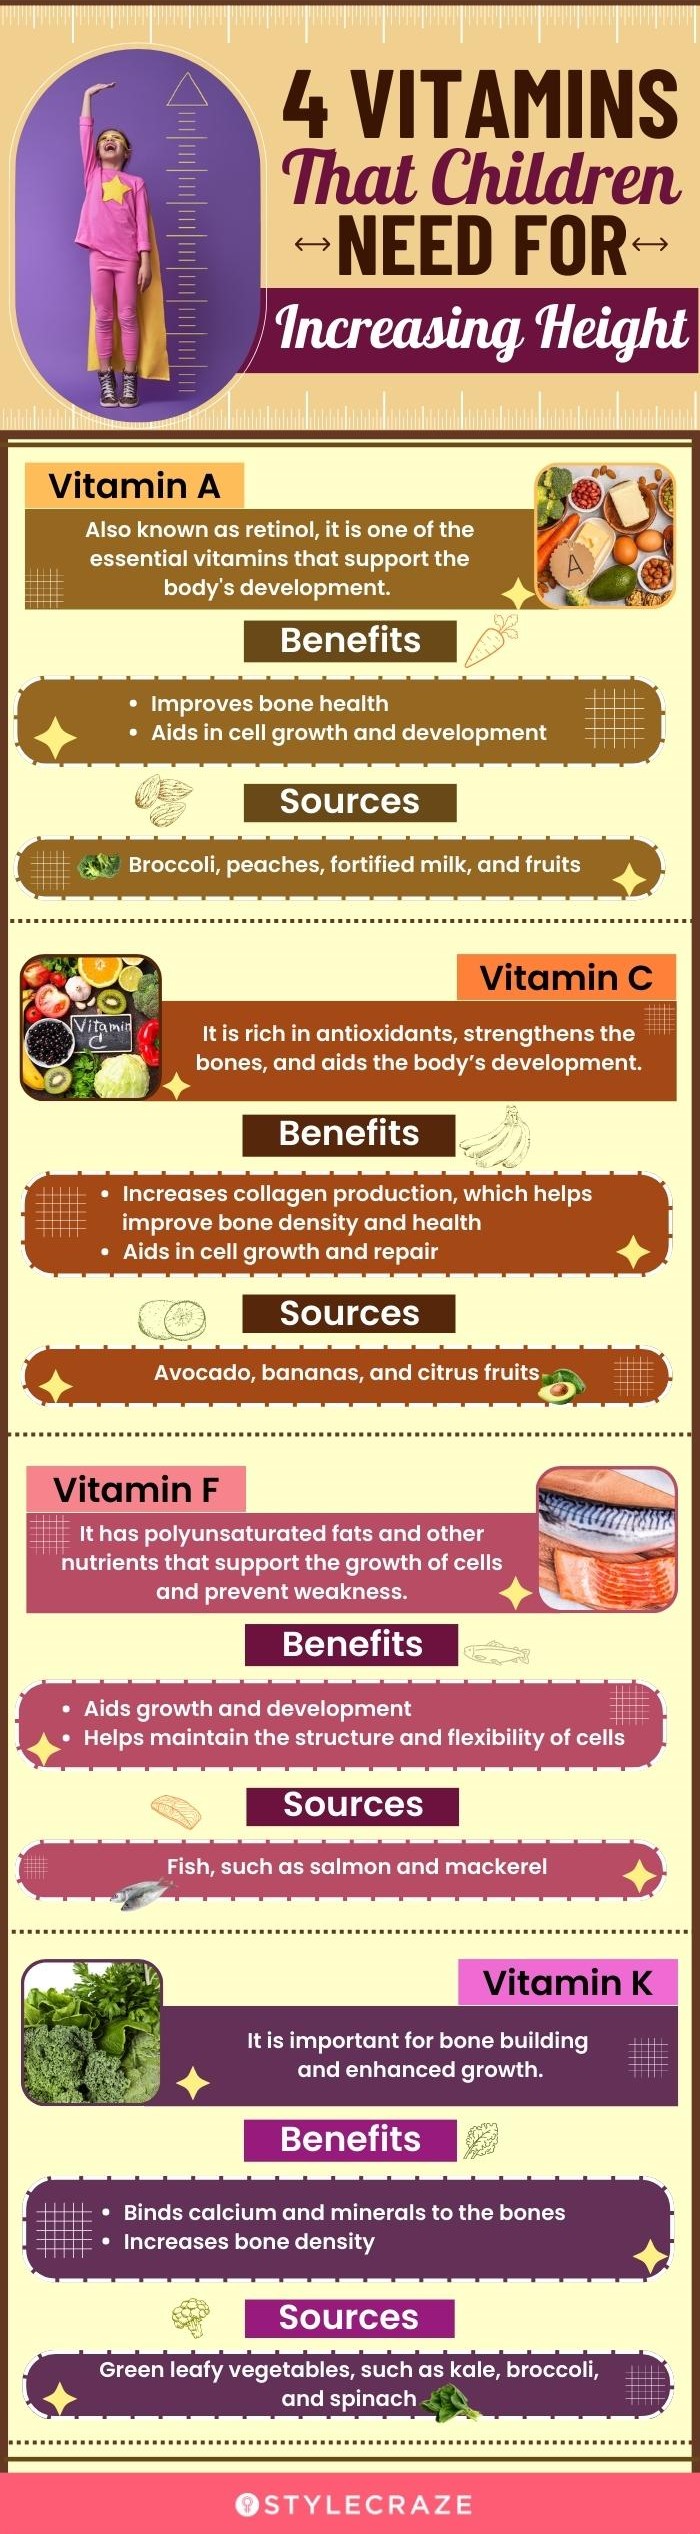 4 vitamins that children need for increasing height (infographic)